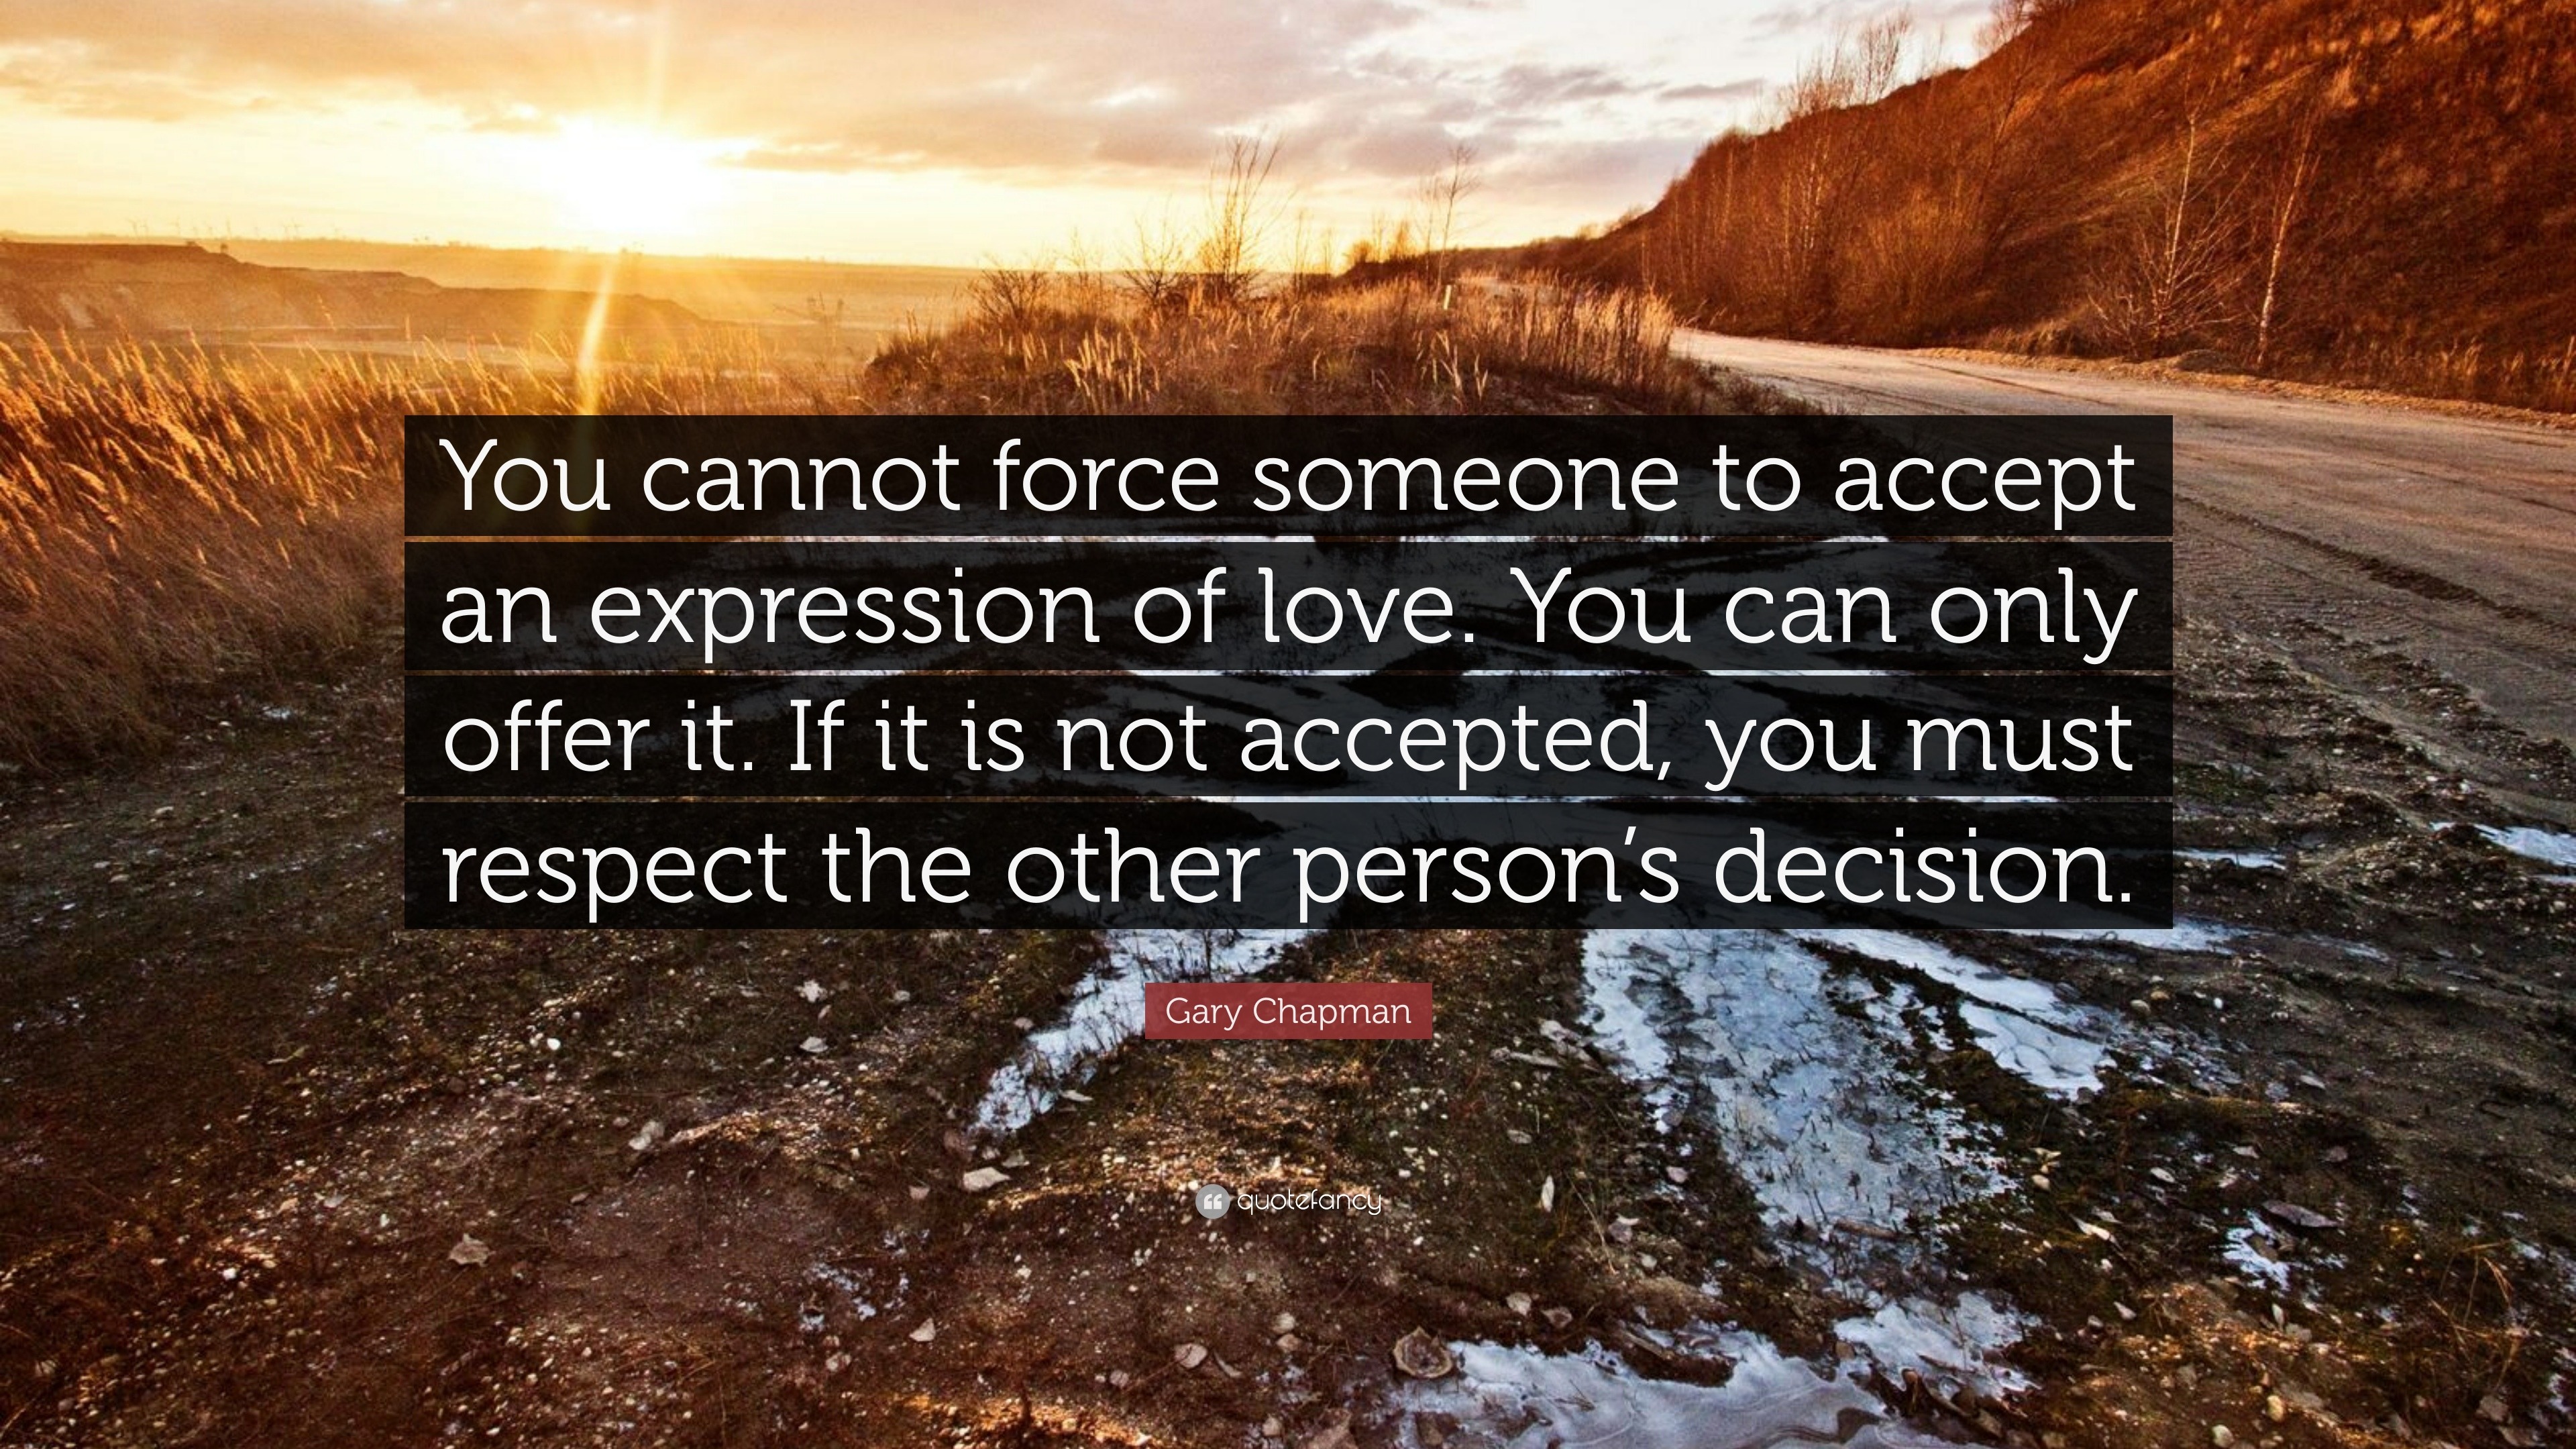 Gary Chapman Quote “You cannot force someone to accept an expression of love